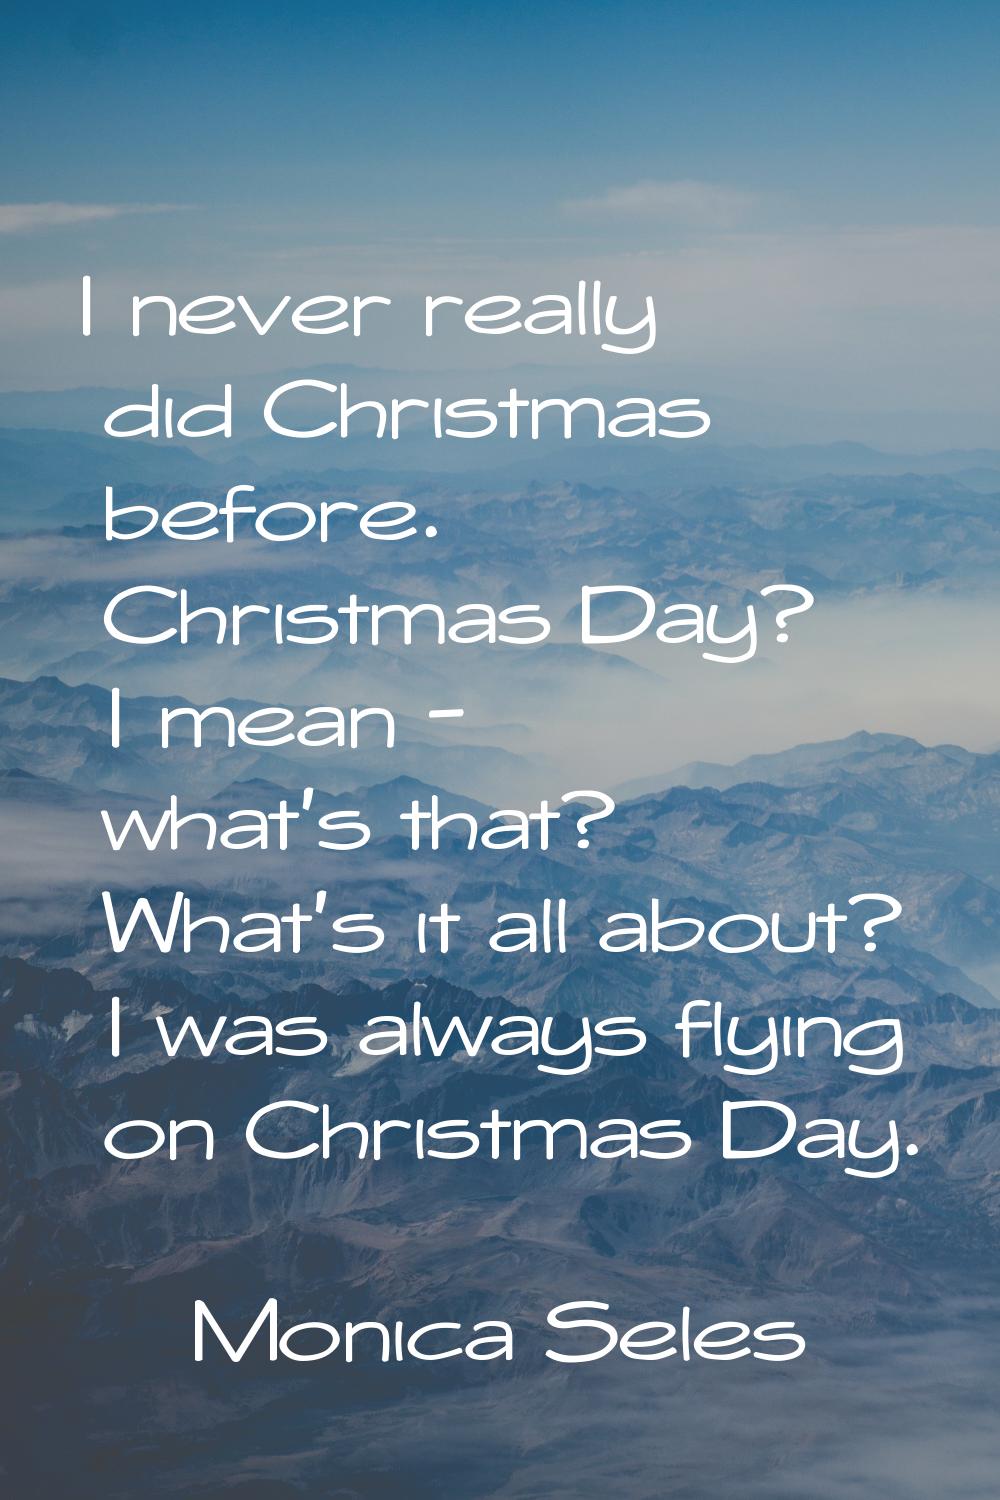 I never really did Christmas before. Christmas Day? I mean - what's that? What's it all about? I wa